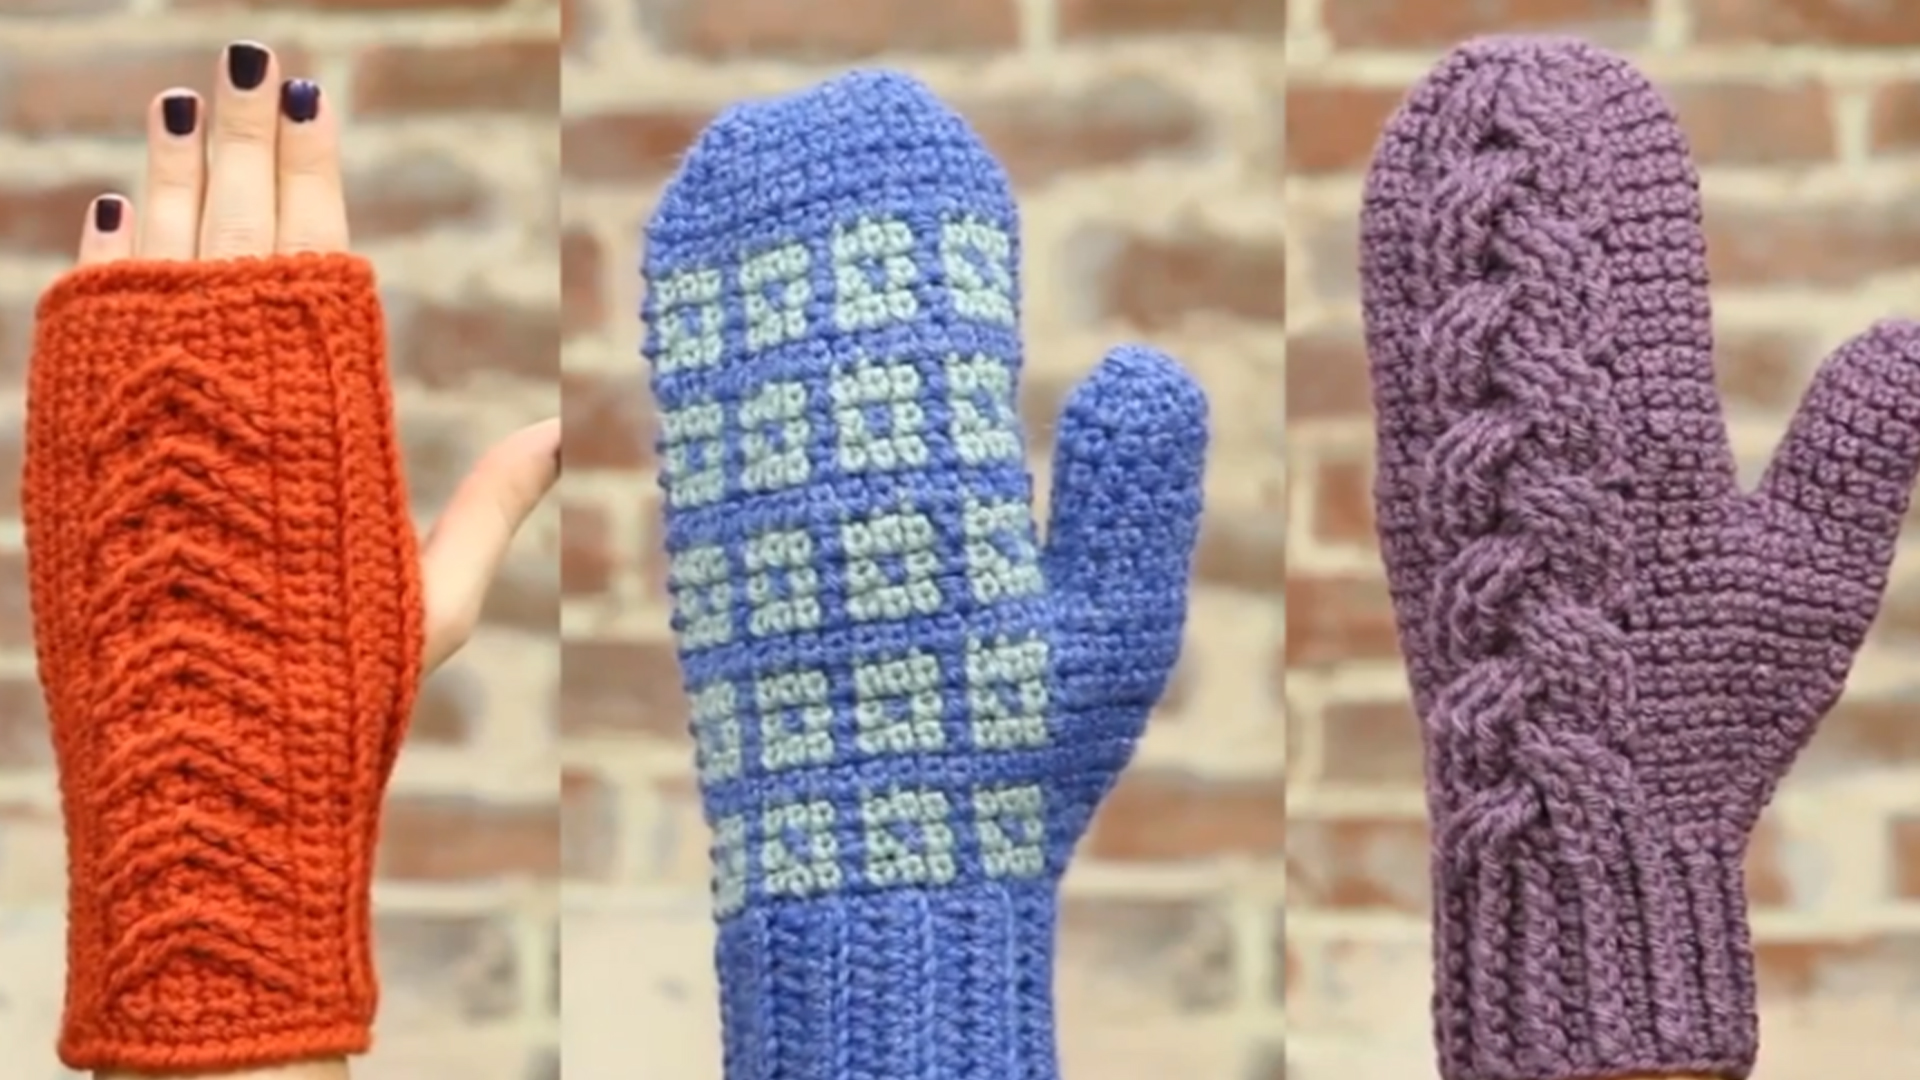 Easy Fingerless Gloves - Free Crochet Pattern and Video - You Should Craft